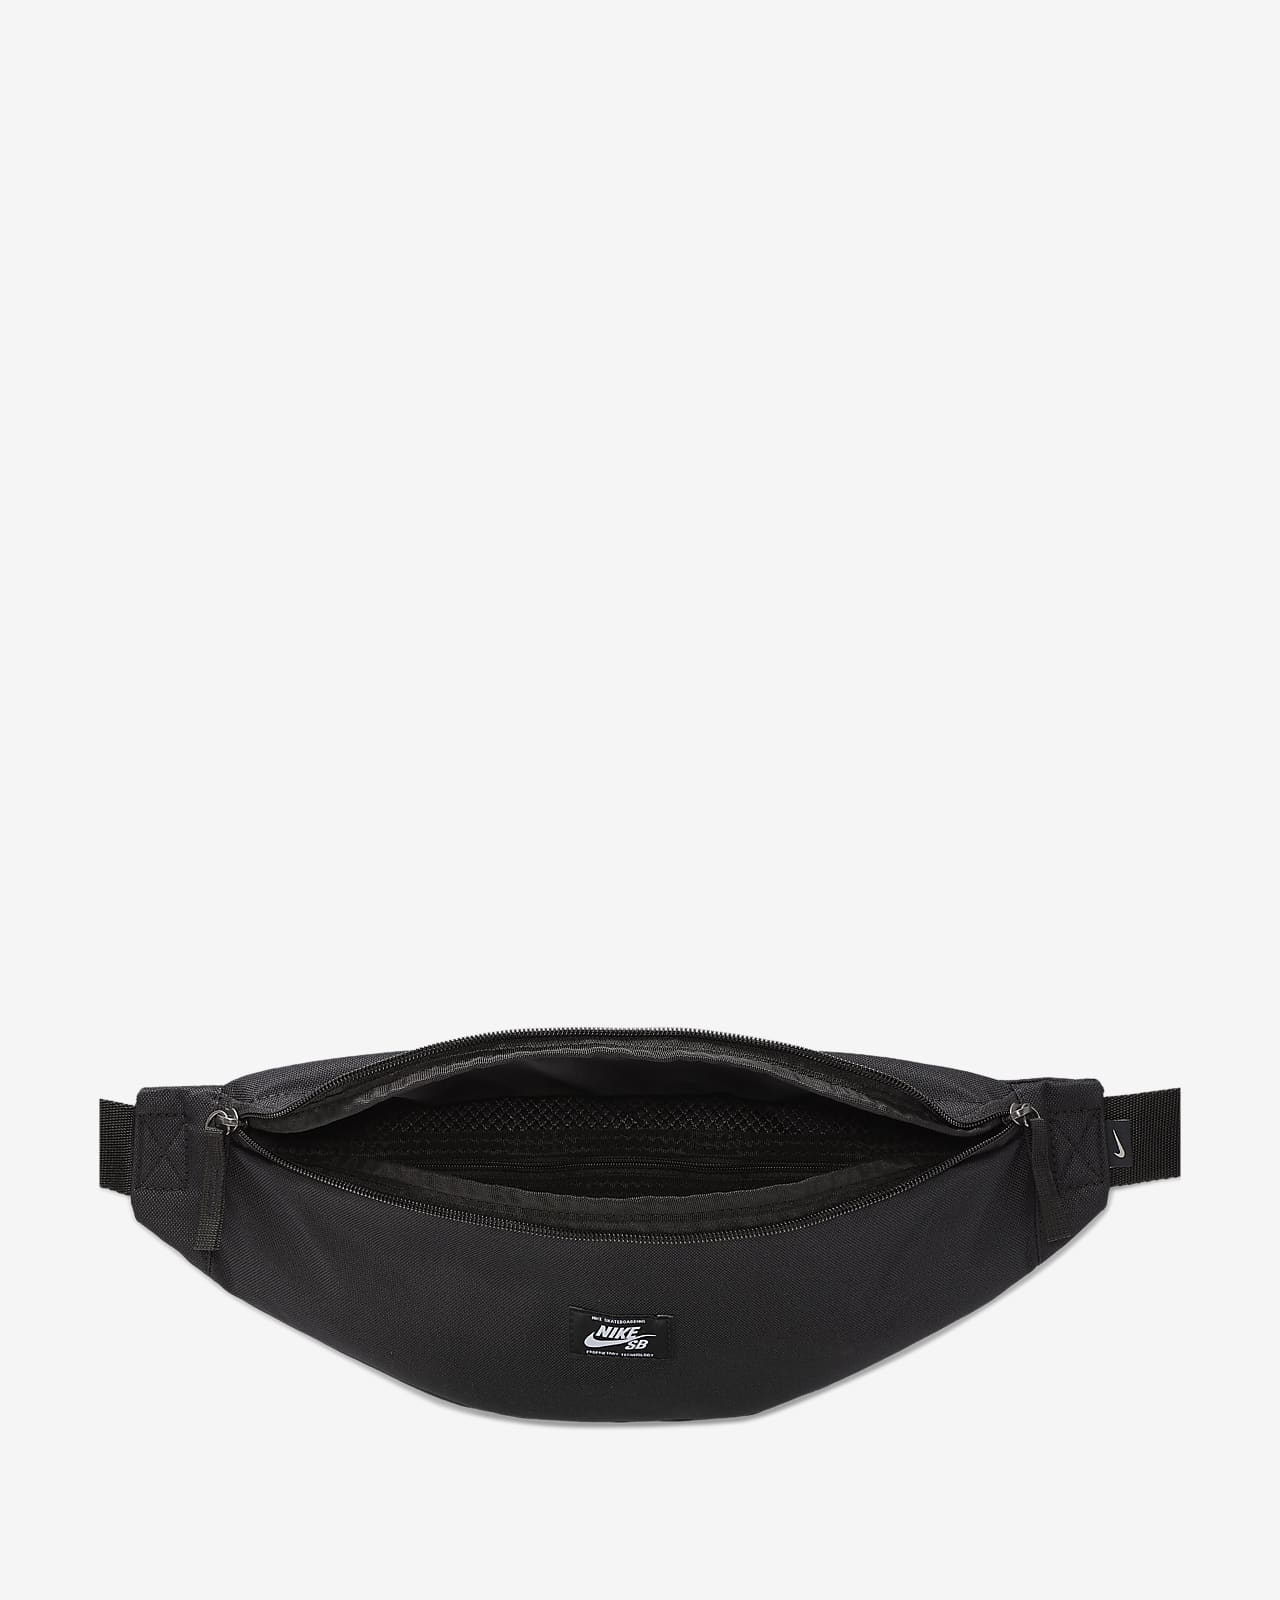 nike fanny pack price